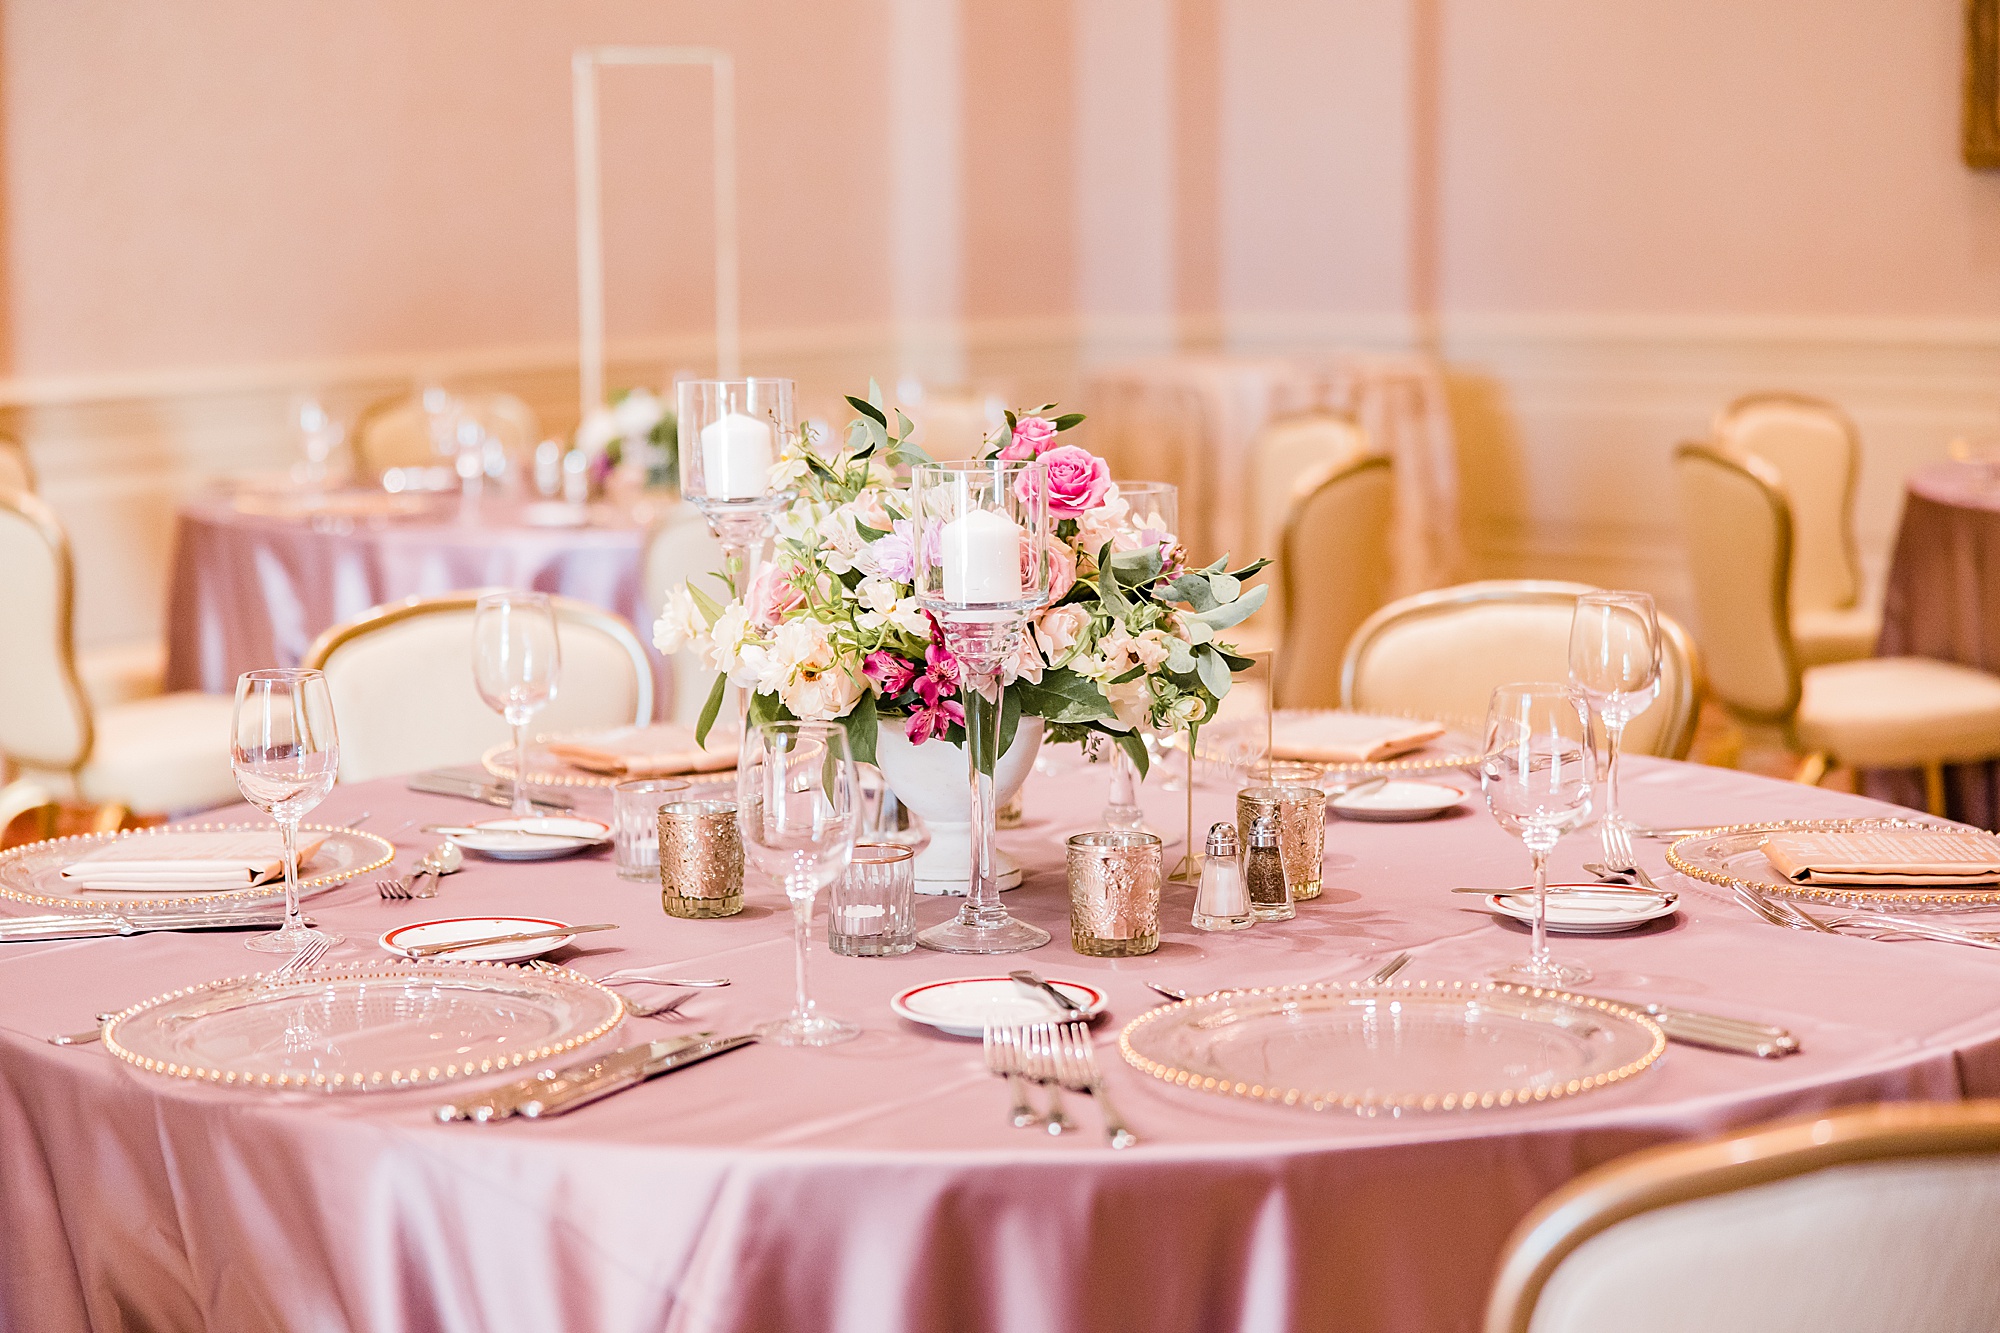 wedding reception place settings with gold and pink details at the Biltmore Village Inn